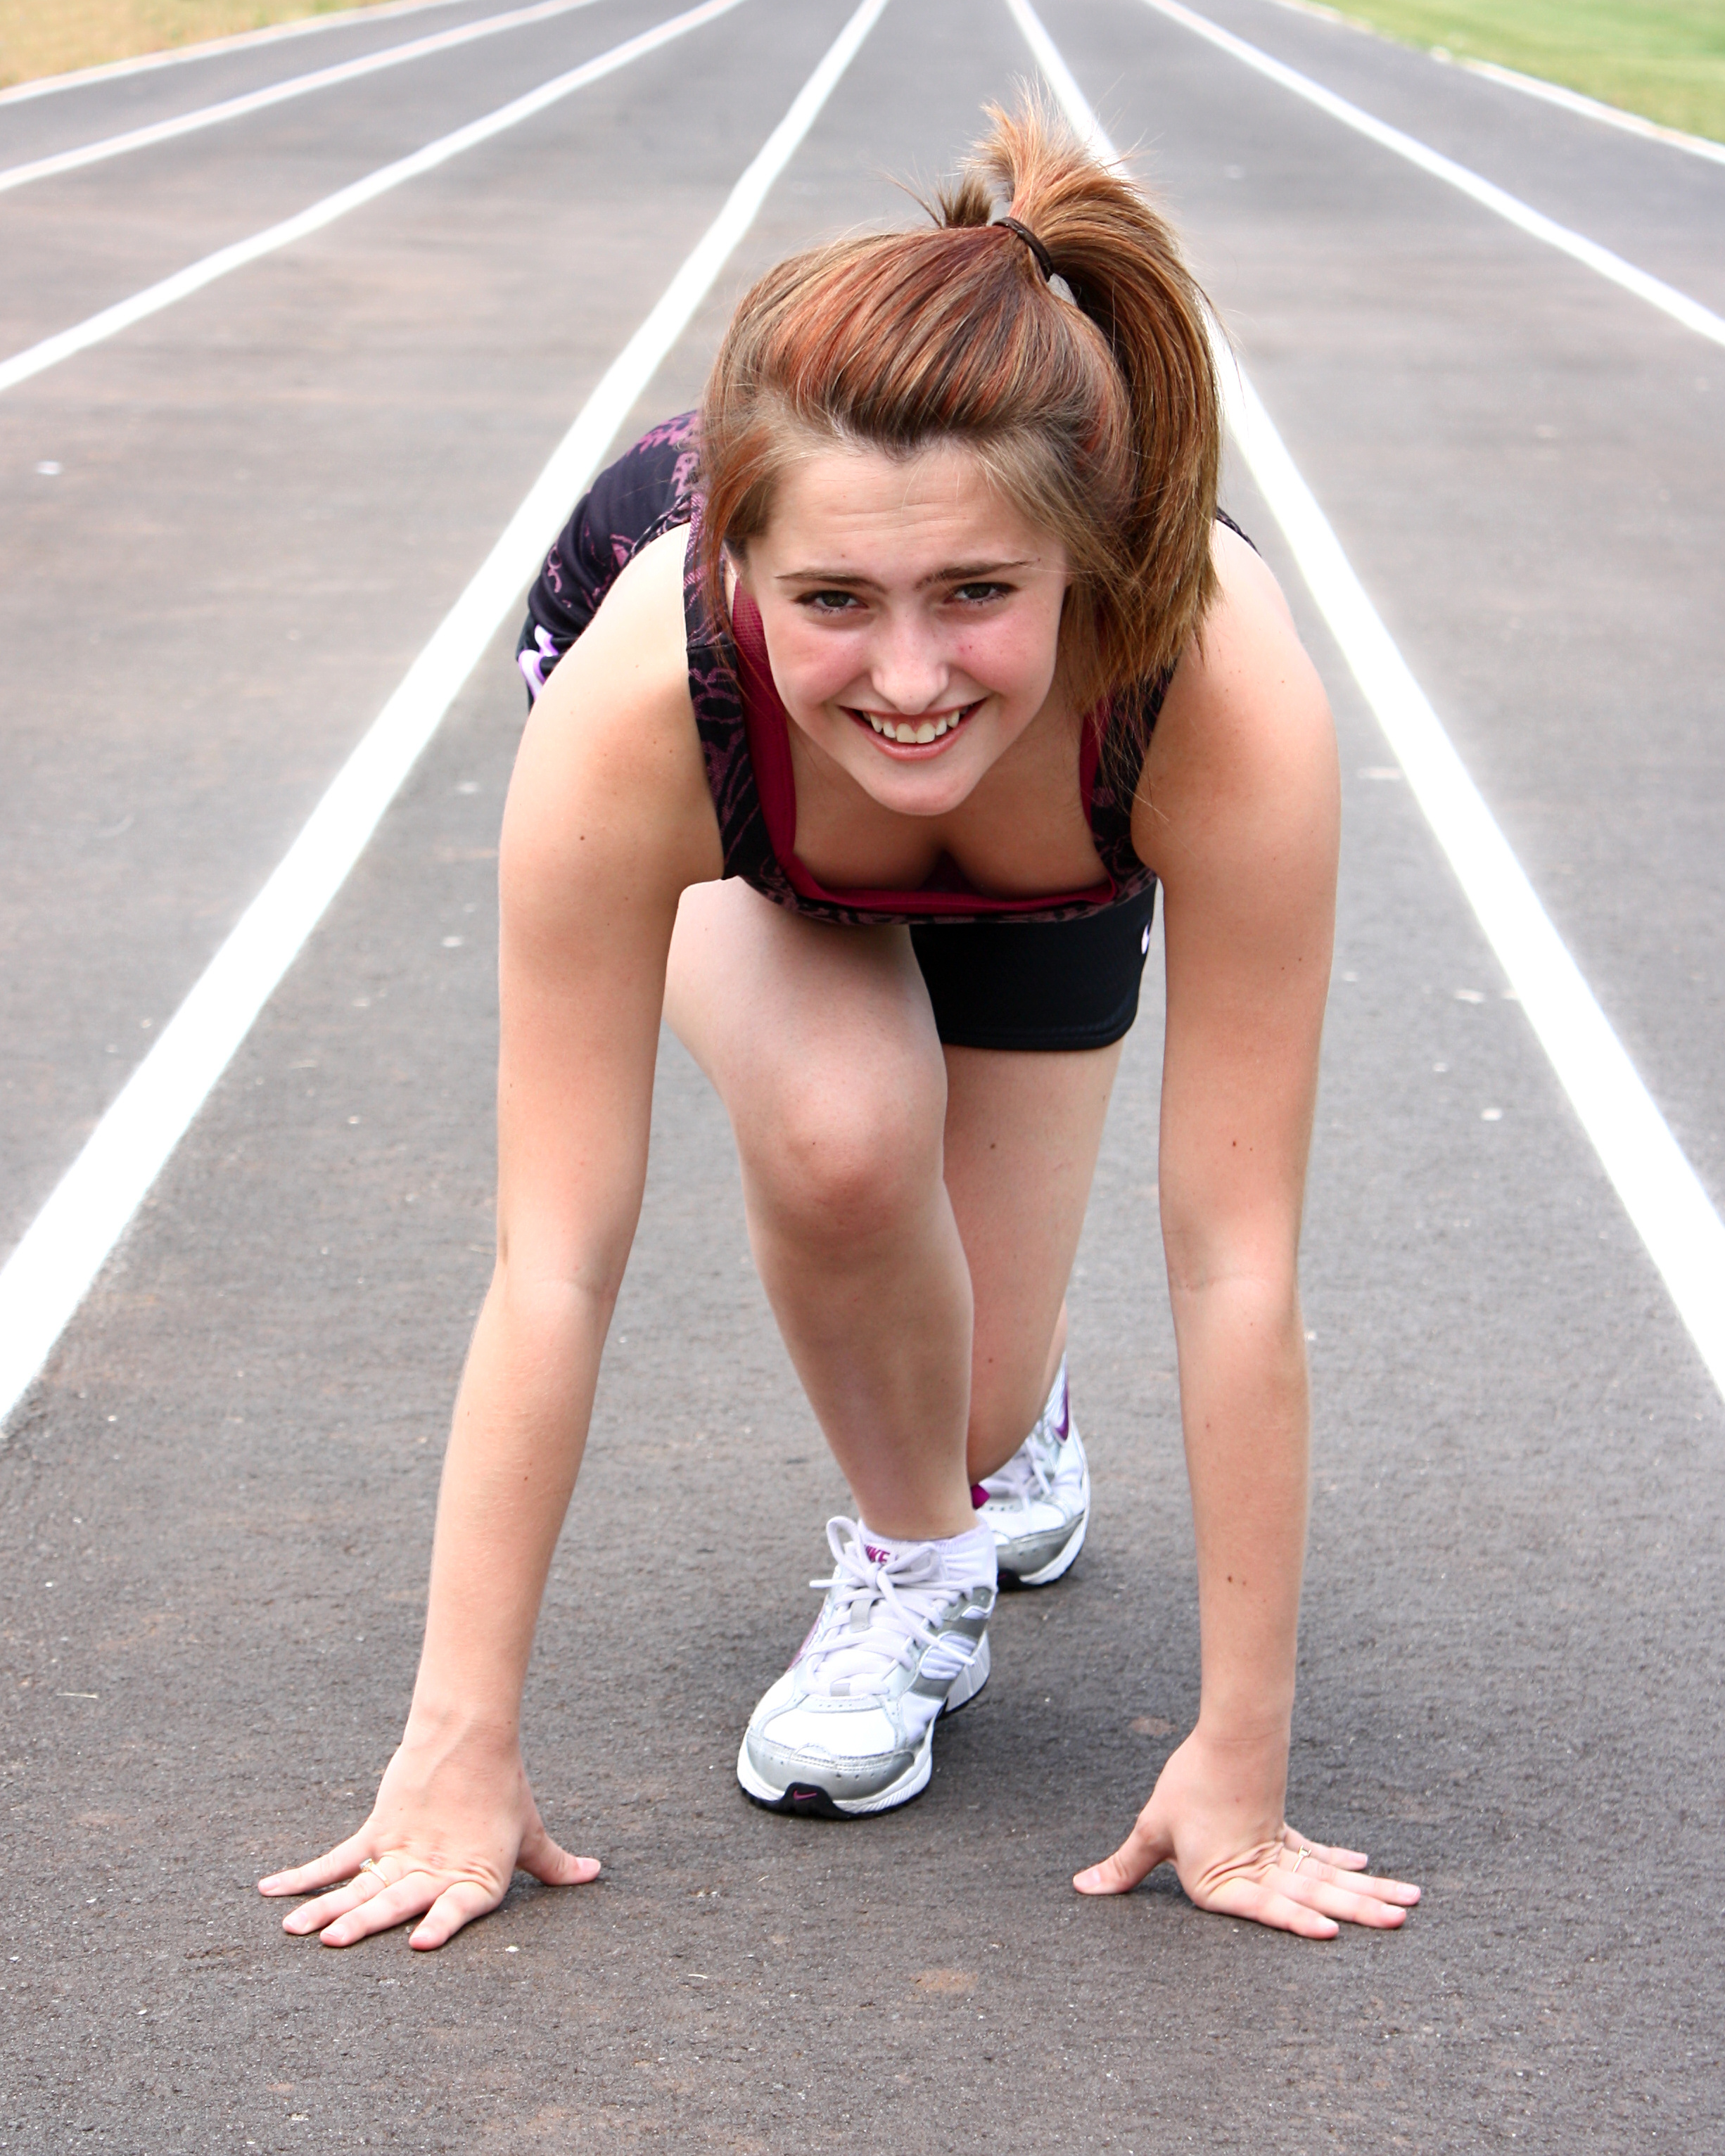 A cute young girl on a track field, Beautiful, Cute, Exercise, Female, HQ Photo